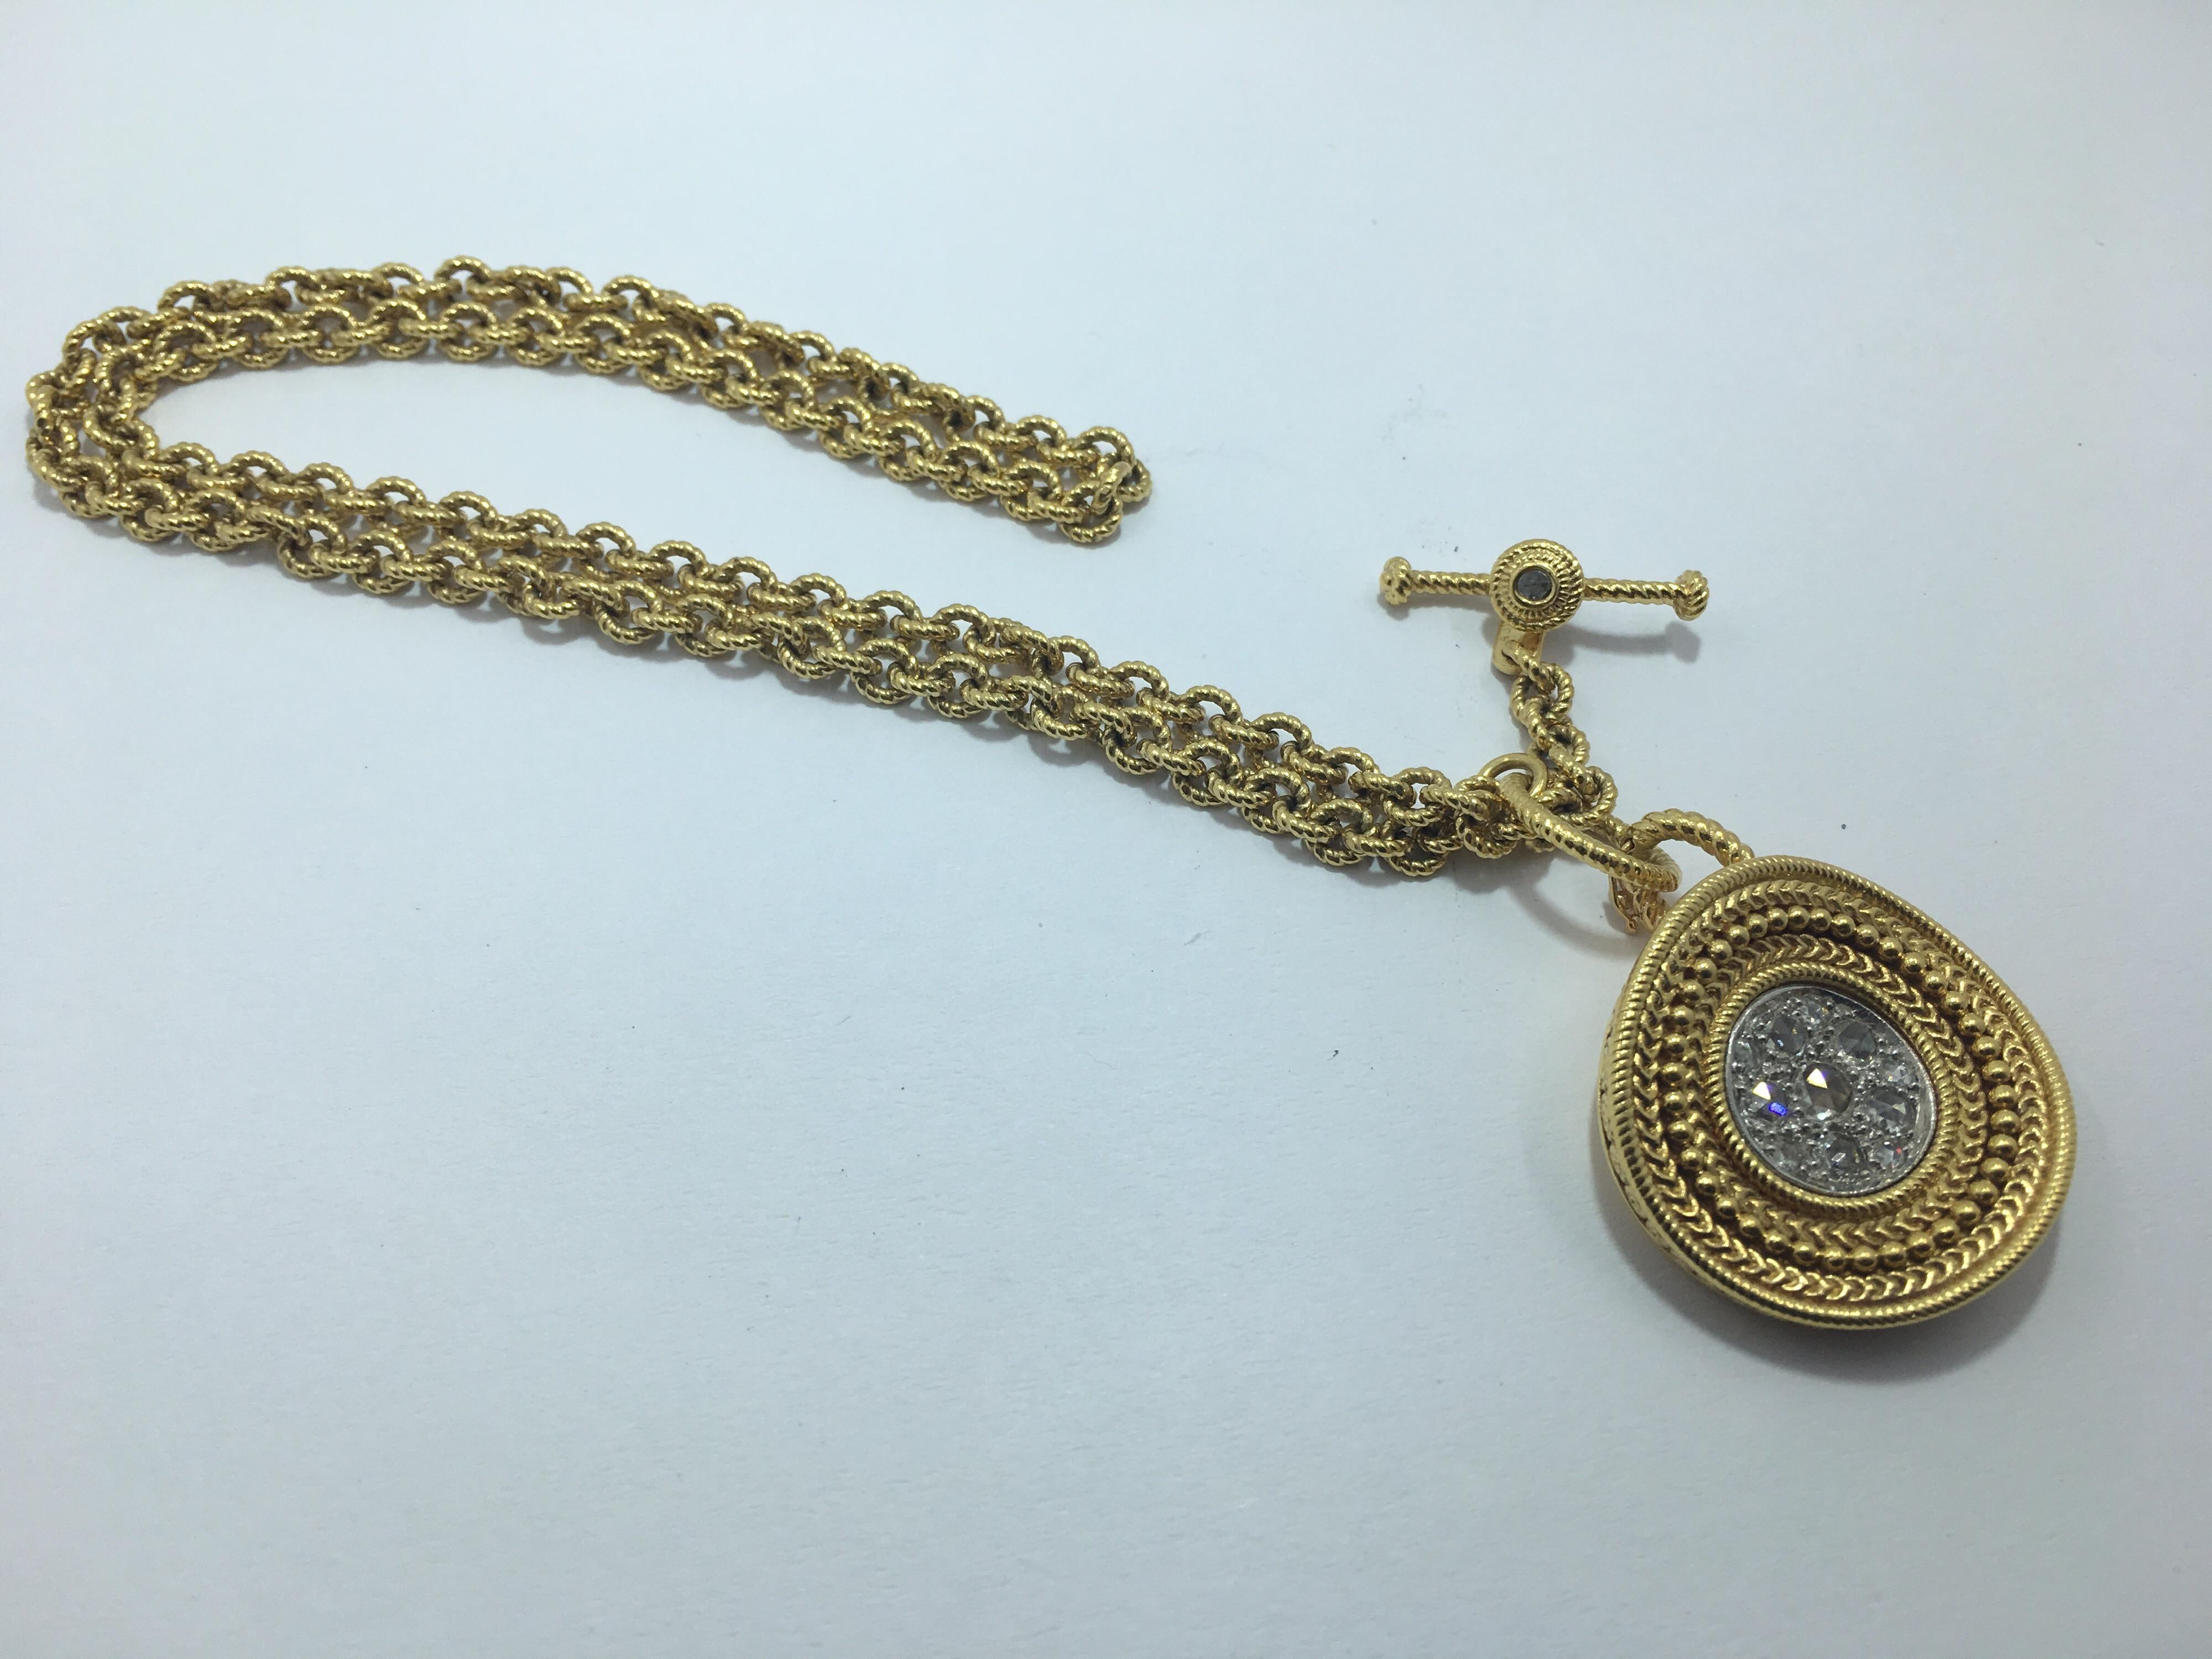 Necklace Ruedo collection
18 Kt Yellow Gold with 11 Diamonds
18 Kt Gold Chain  with a Toggle Clasp with 1 Diamond